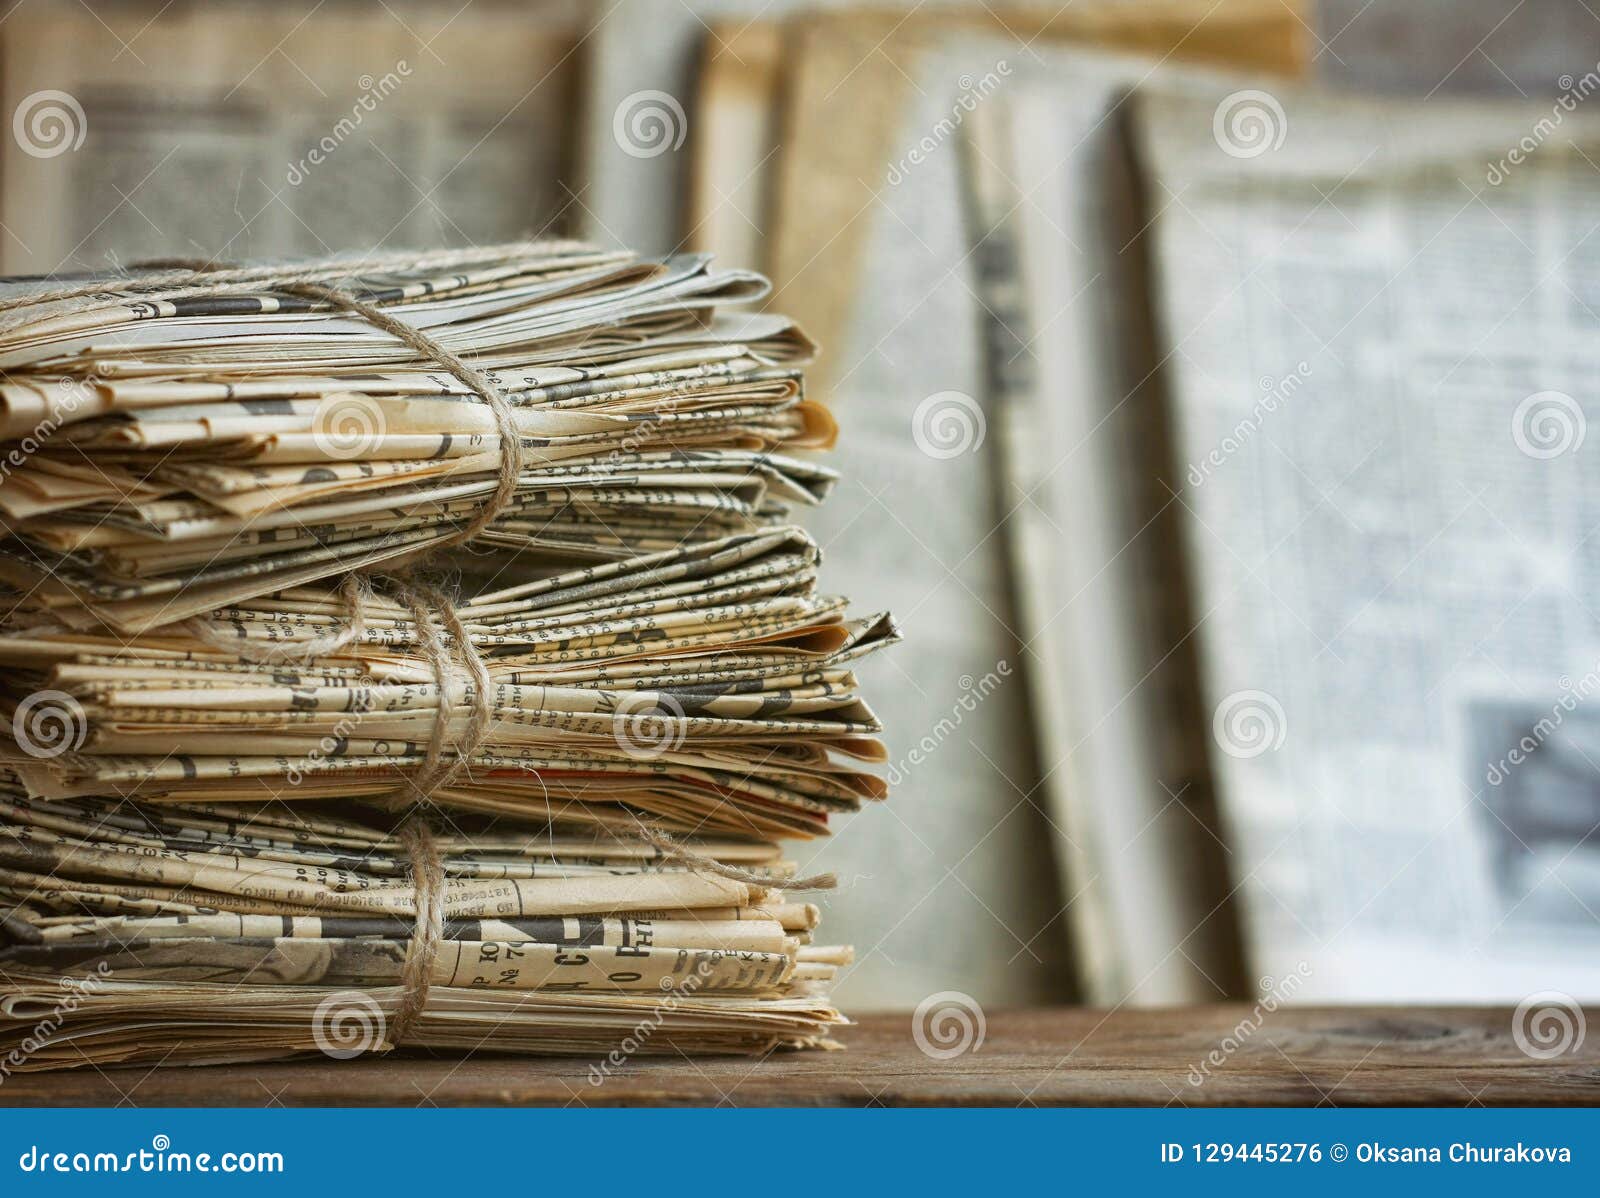 Waste Paper Pile In Vintage  Style Stock Photo Image of 